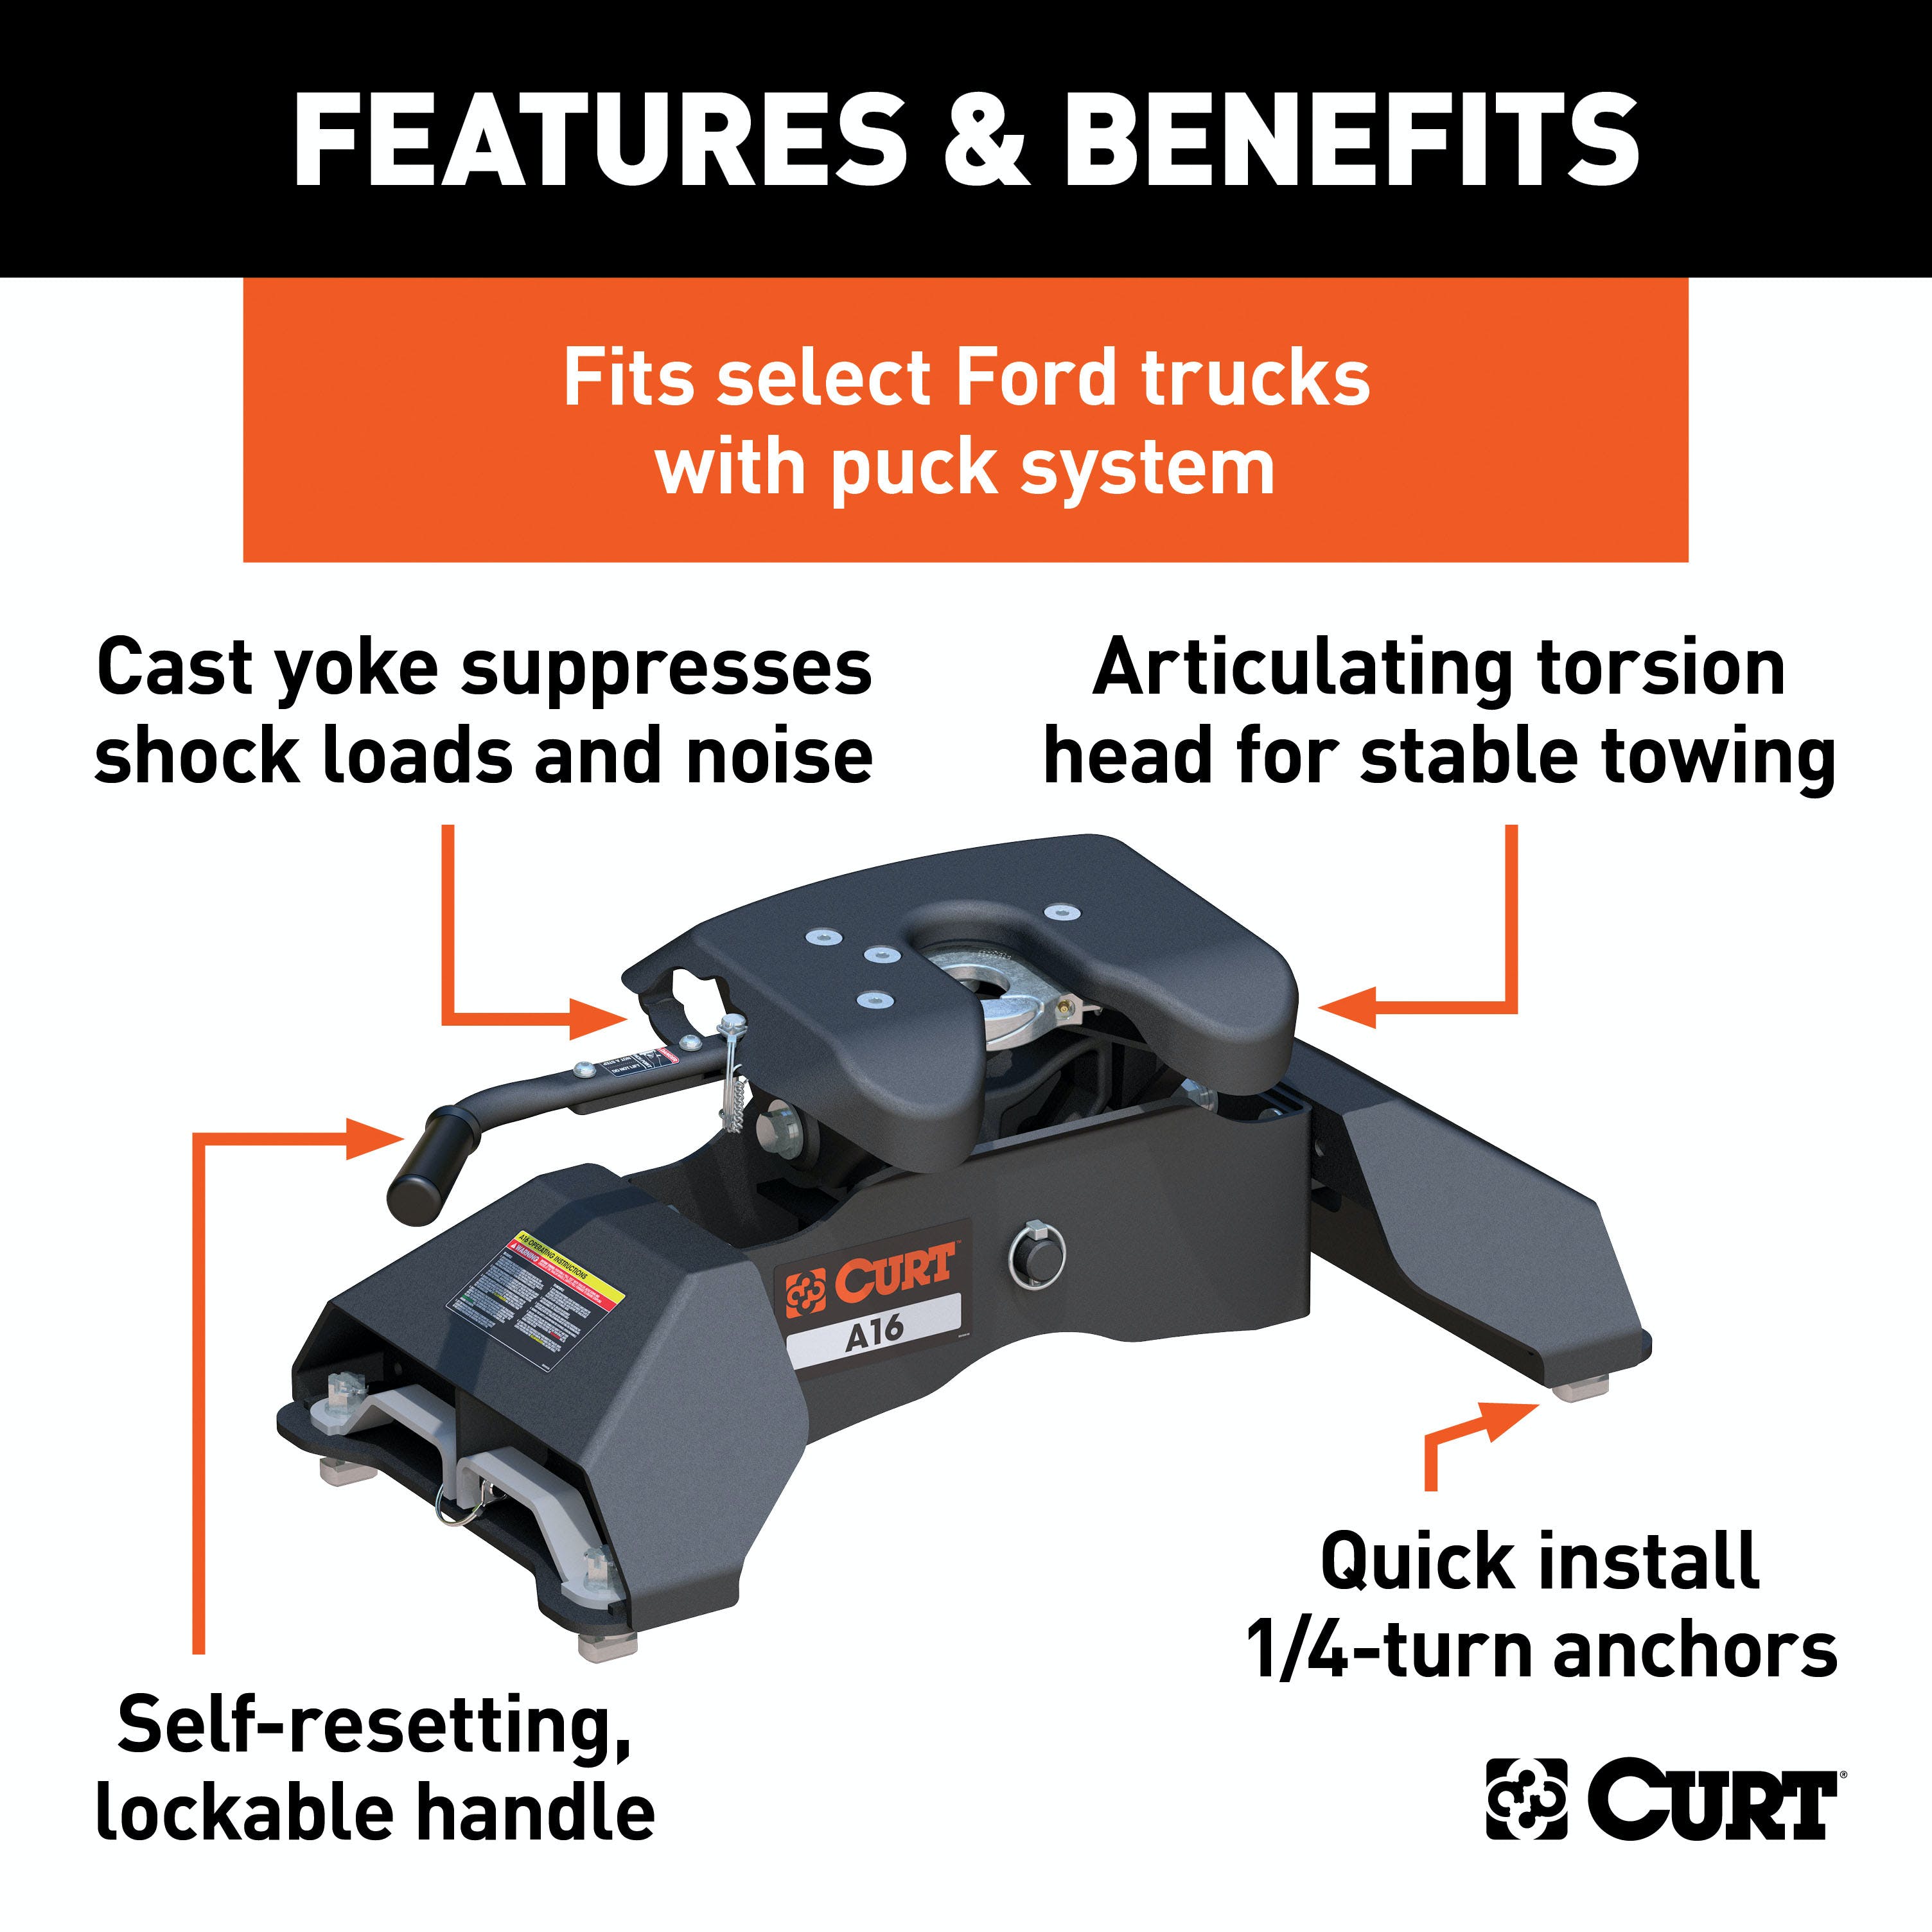 CURT 16033 A16 5th Wheel Hitch, Select Ford F-250, F-350, F-450, 8' Bed Puck System